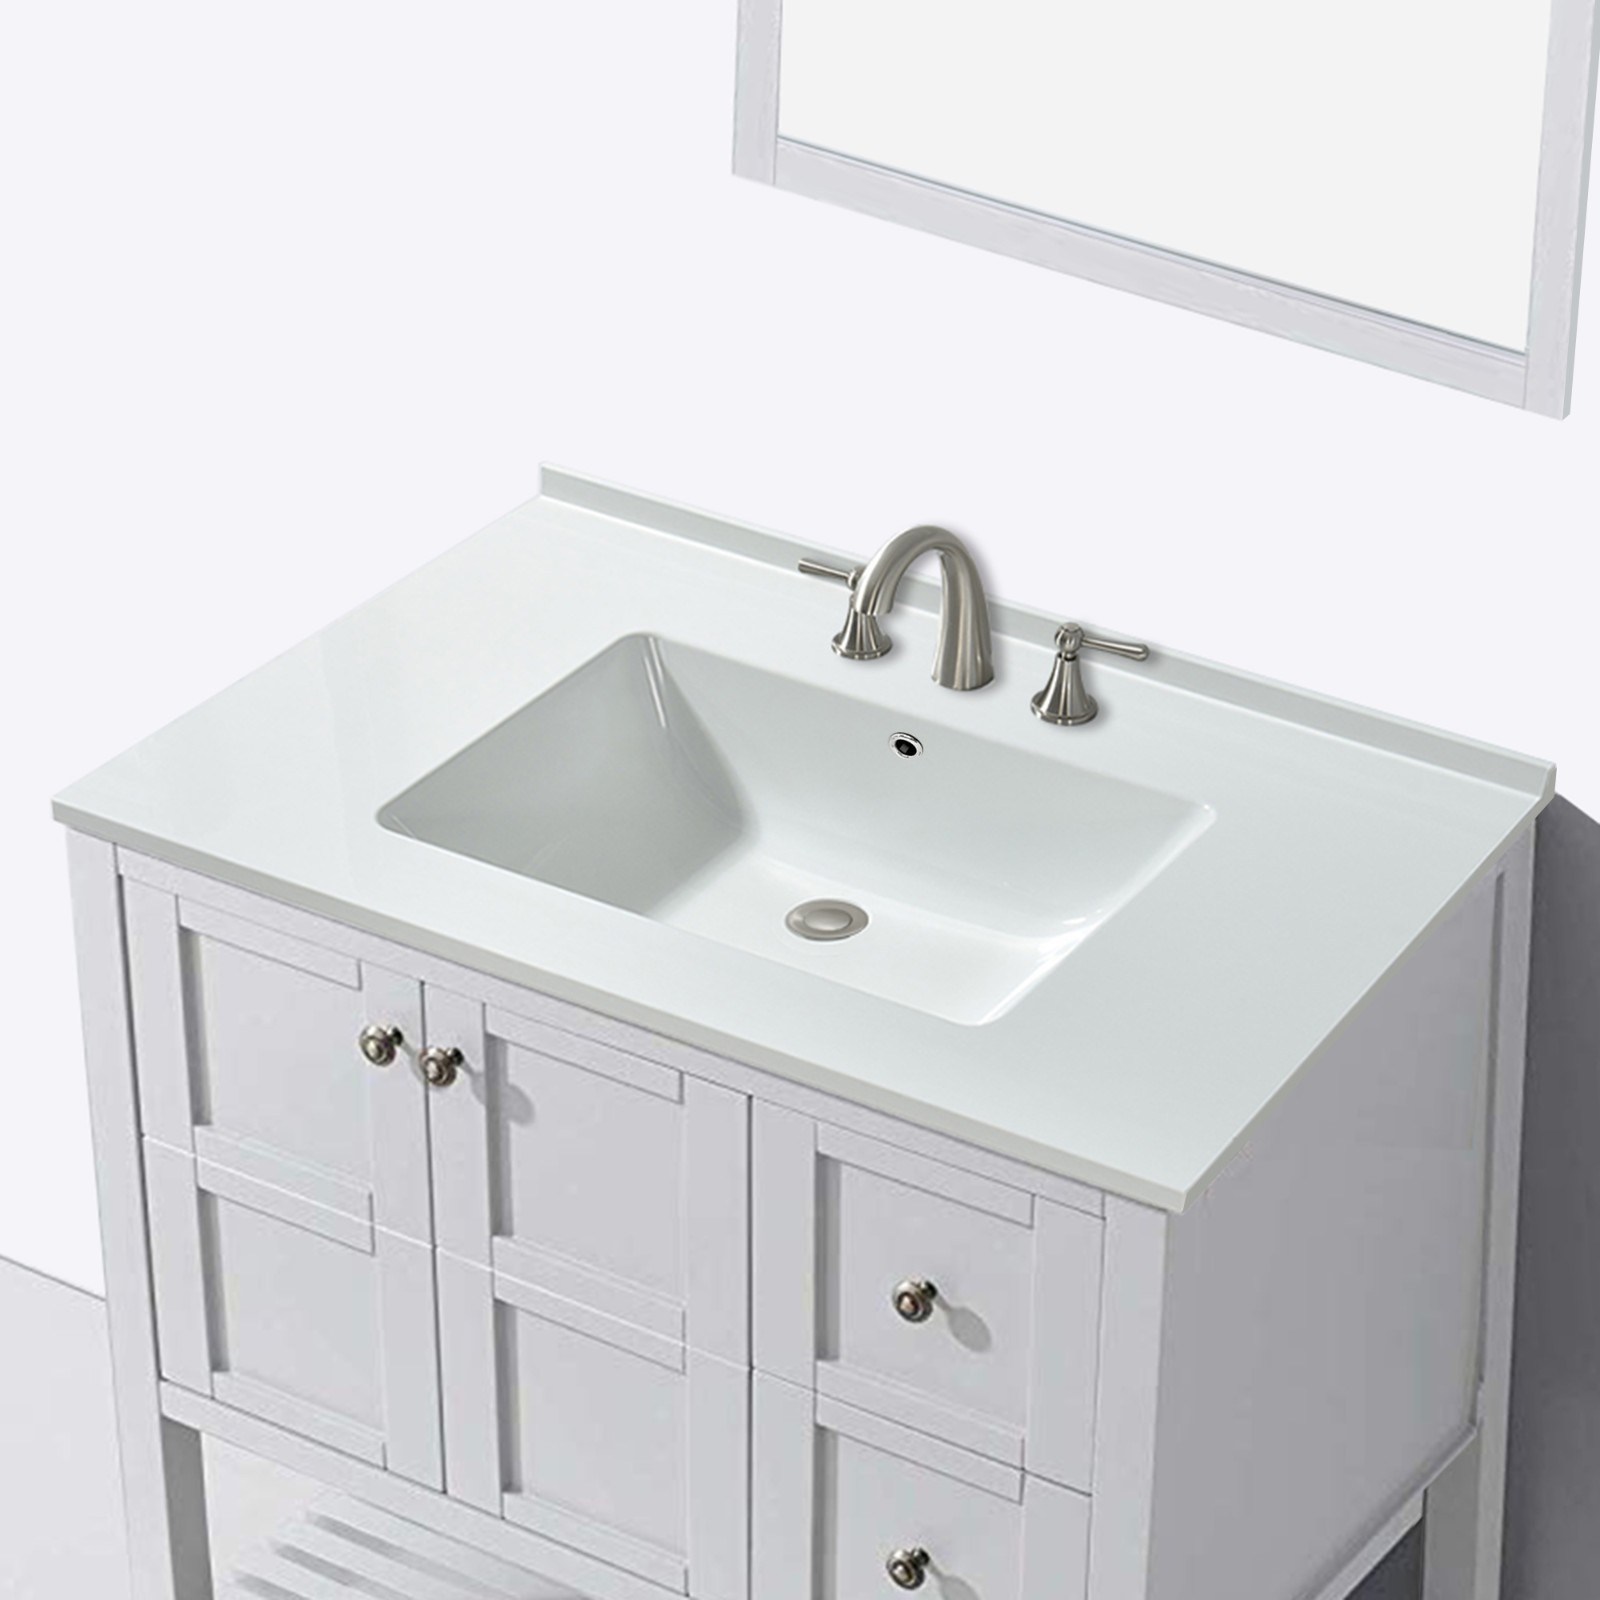  WOODBRIDGE VT4322-1008 Solid Surface Vanity Top with with Intergrated Sink and 3 Faucet Holes for 8-inch Widespread Faucet, 43